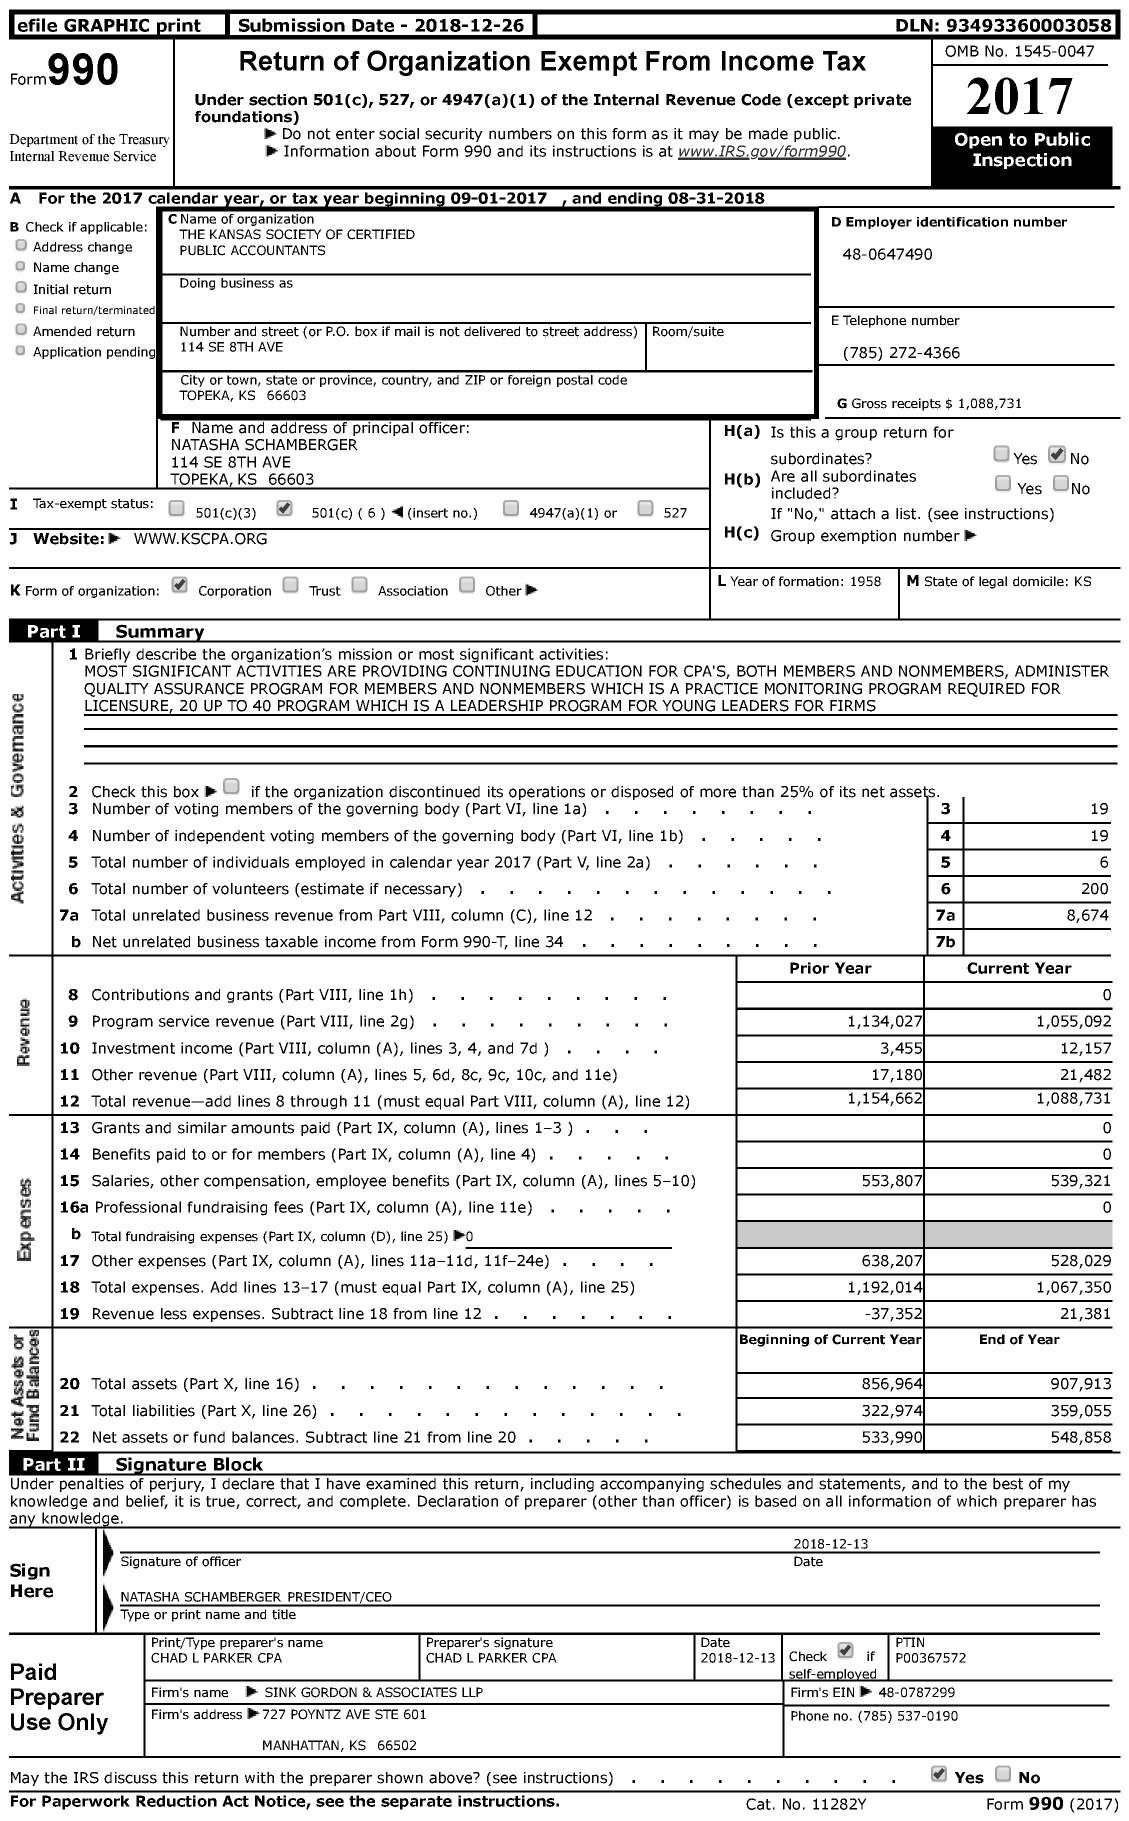 Image of first page of 2017 Form 990 for Kansas Society of Certified Public Accountants (KSCPA)